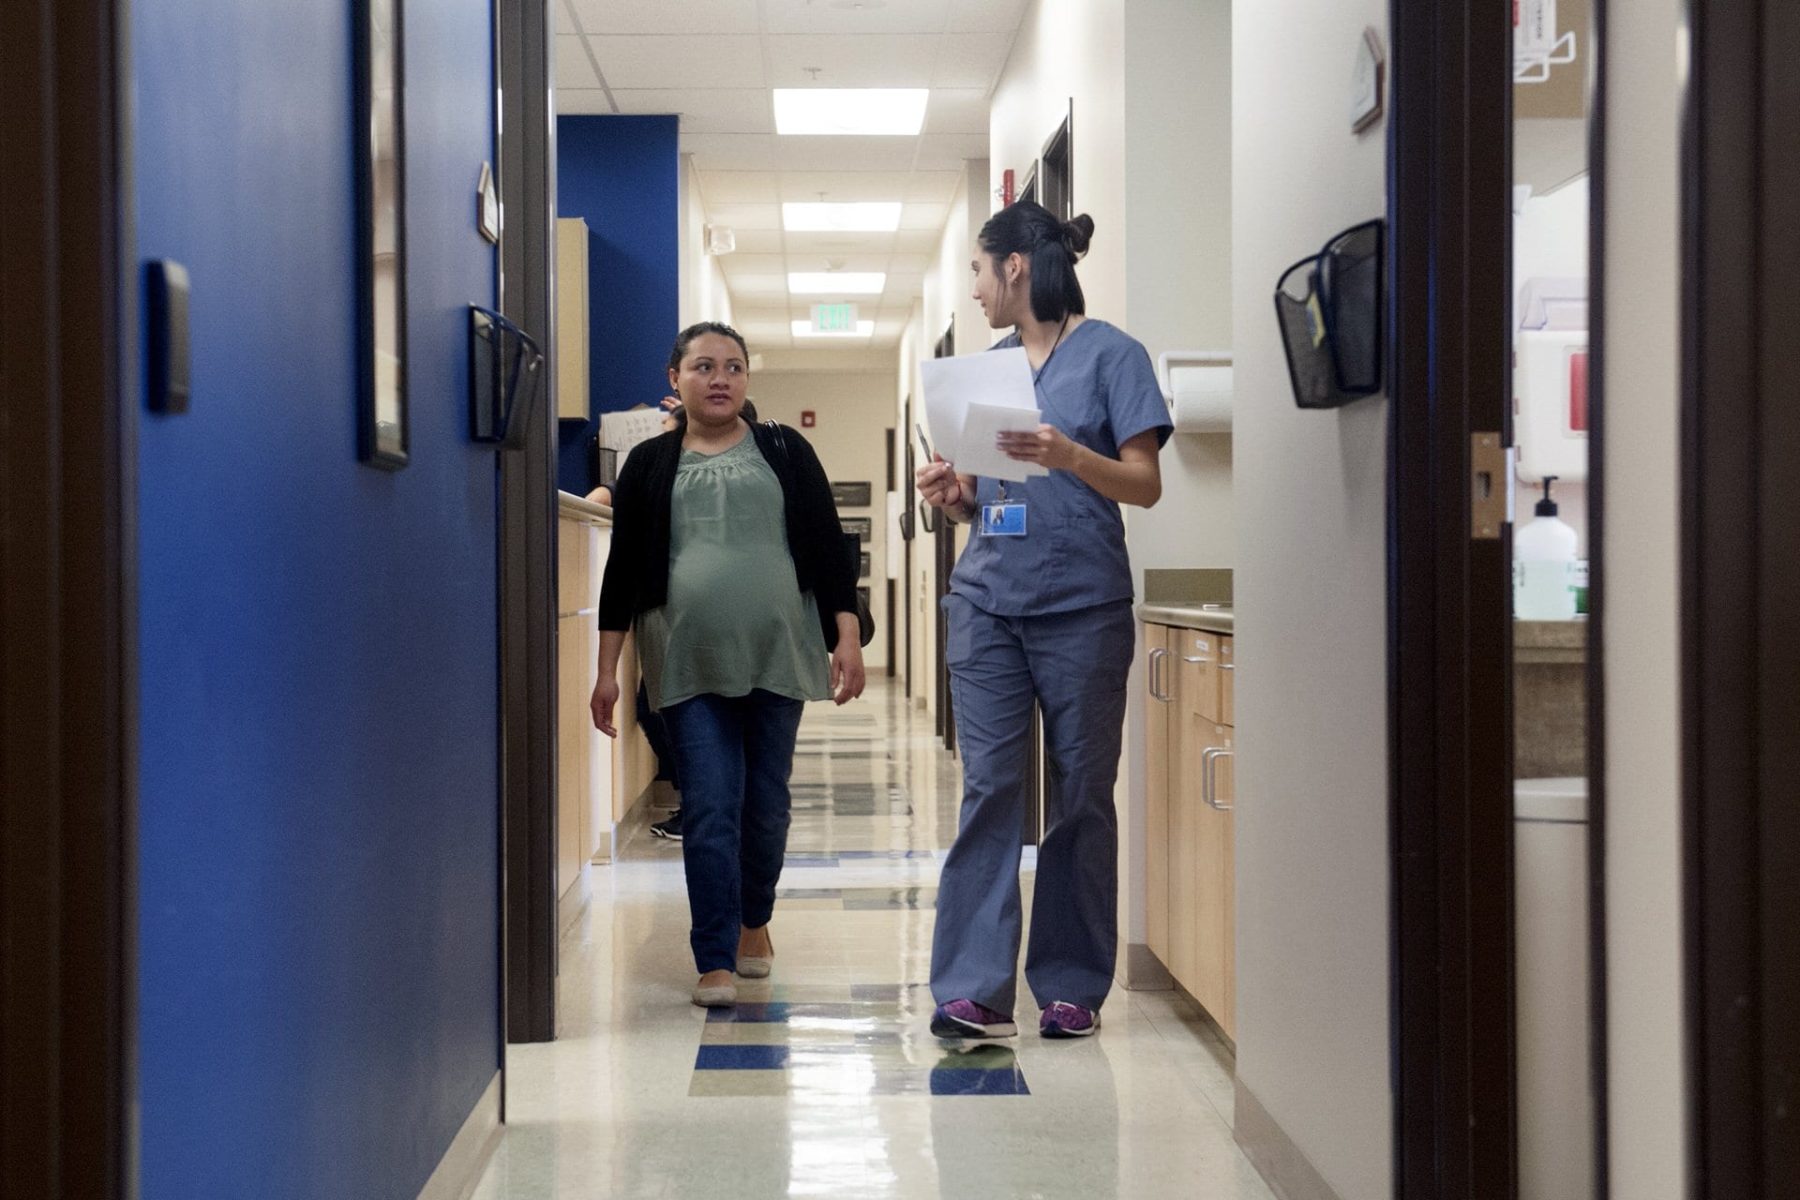 A pregnant woman walks down the hallway of a medical facility with someone in scrubs.